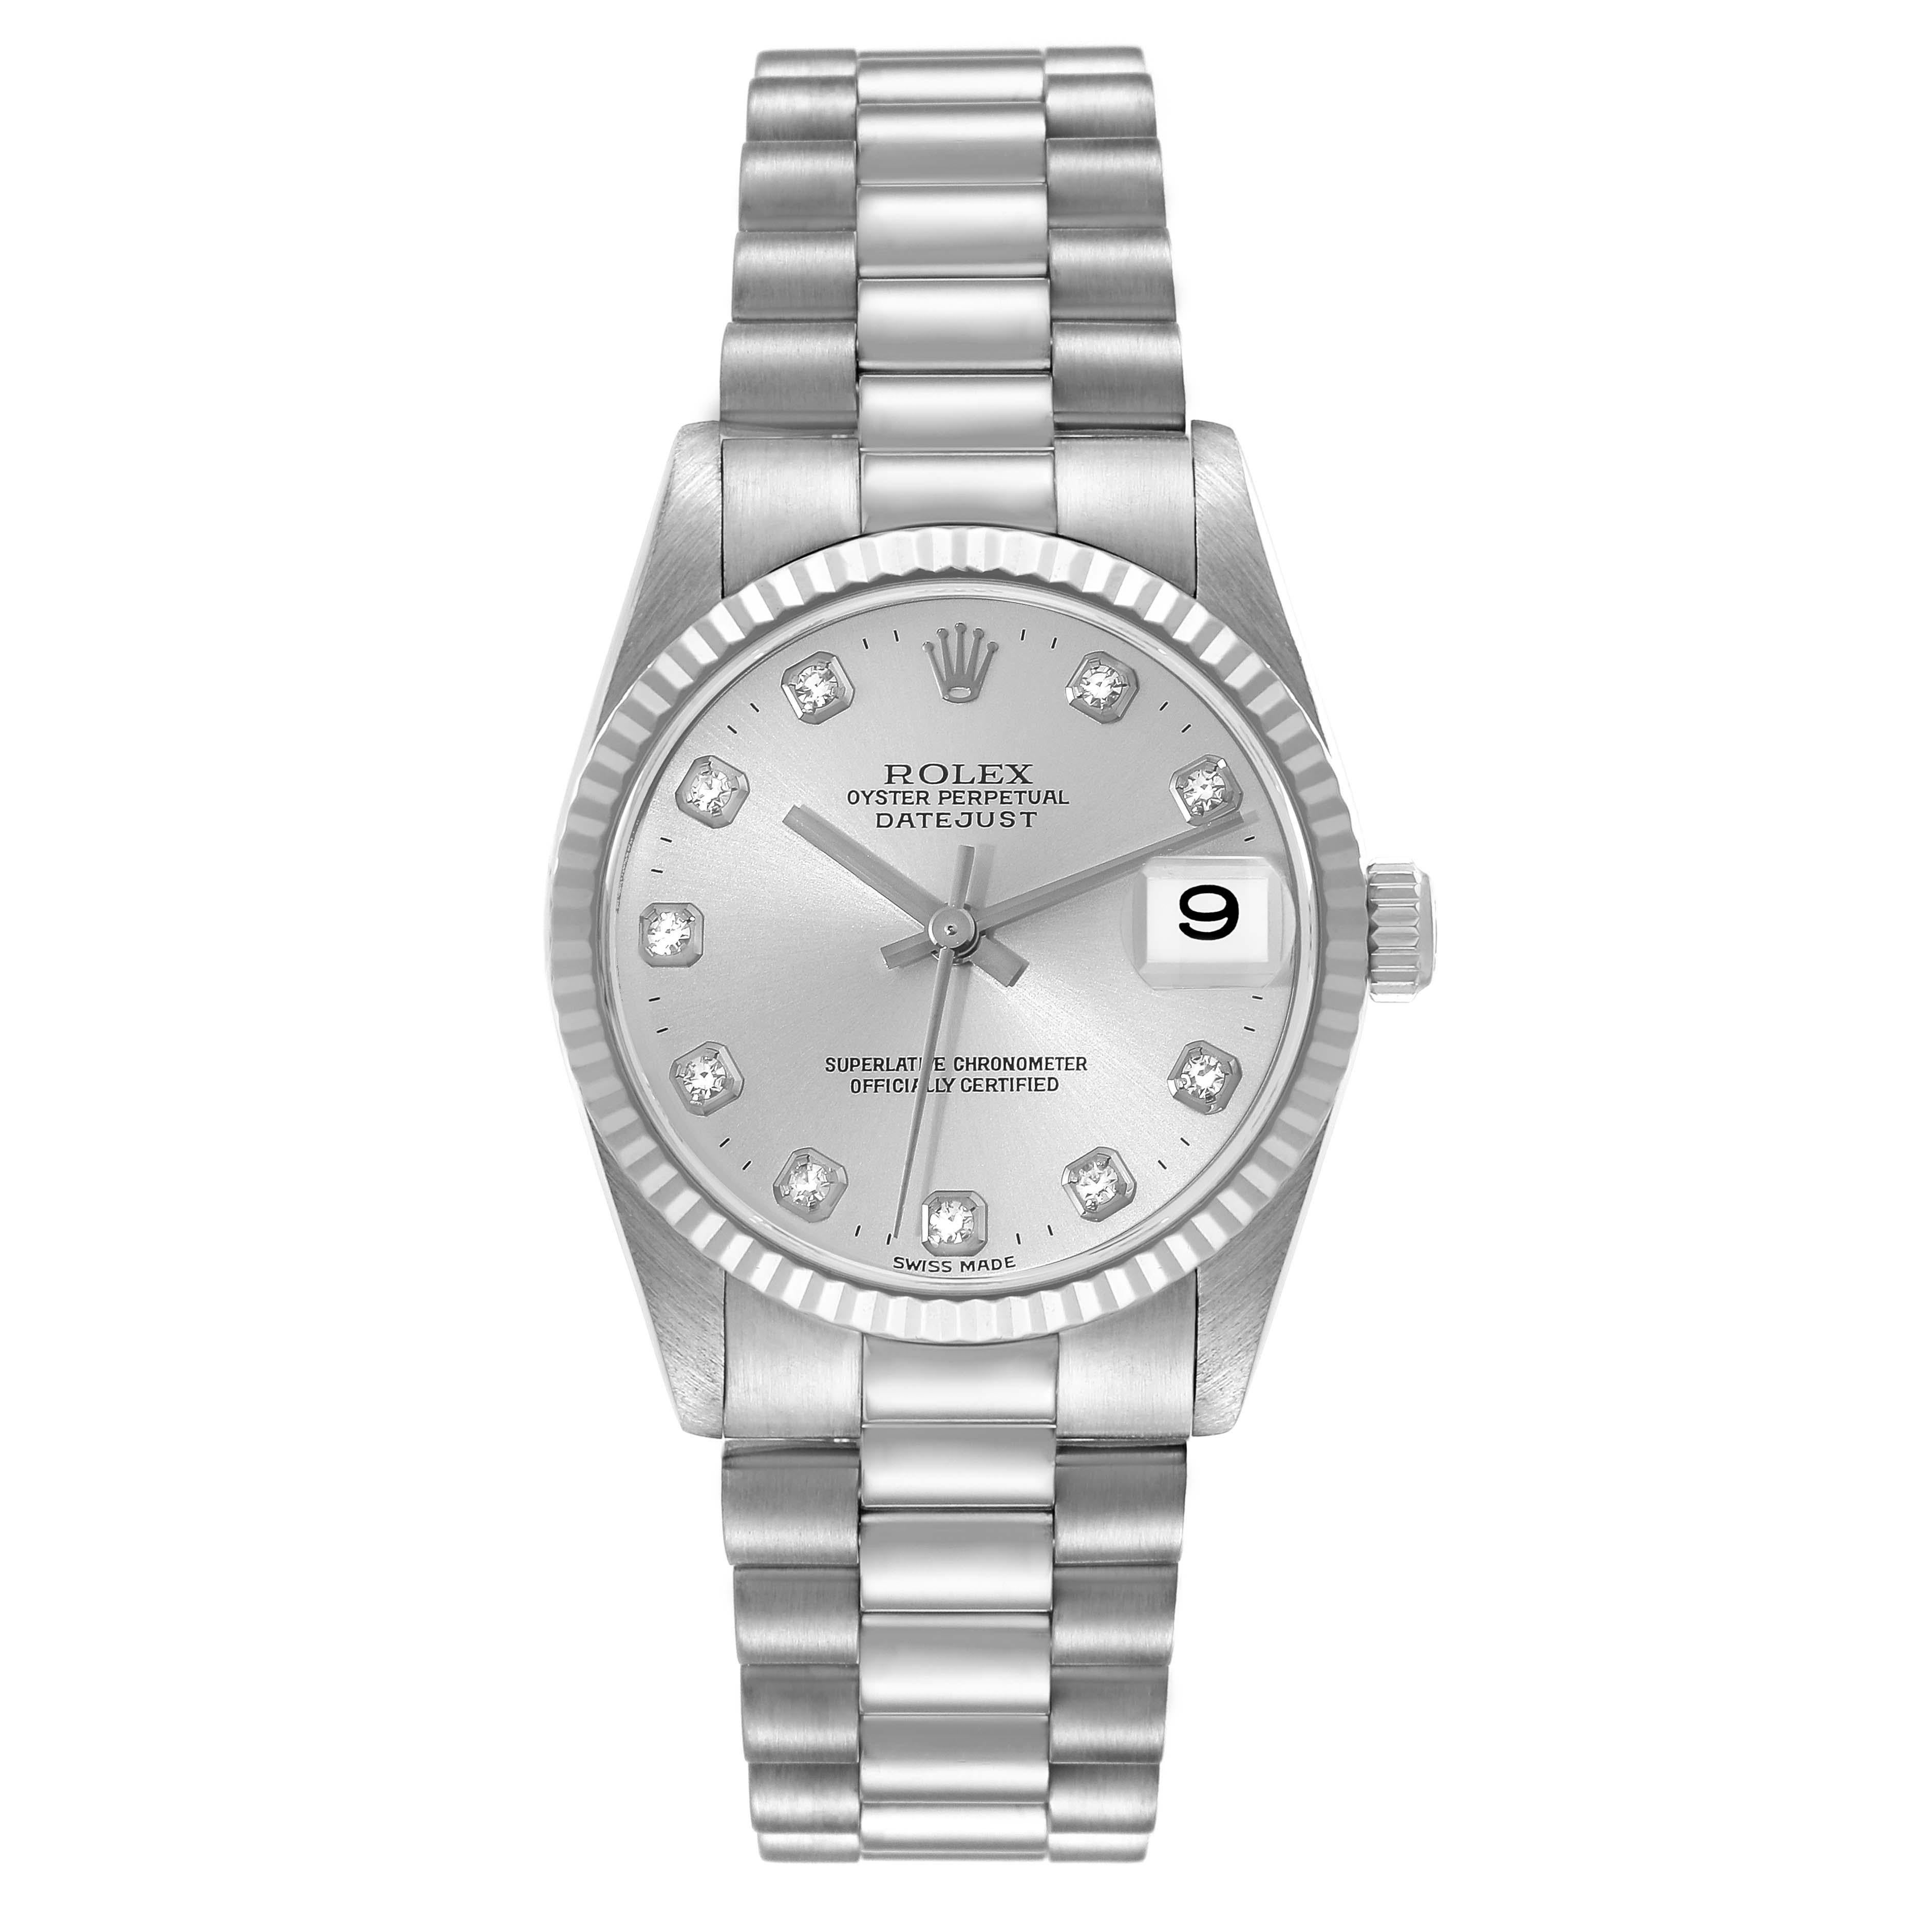 Rolex Datejust President Midsize White Gold Diamond Ladies Watch 78279. Officially certified chronometer self-winding movement. 18k white gold oyster case 31.0 mm in diameter. Rolex logo on a crown. 18k white gold fluted bezel. Scratch resistant